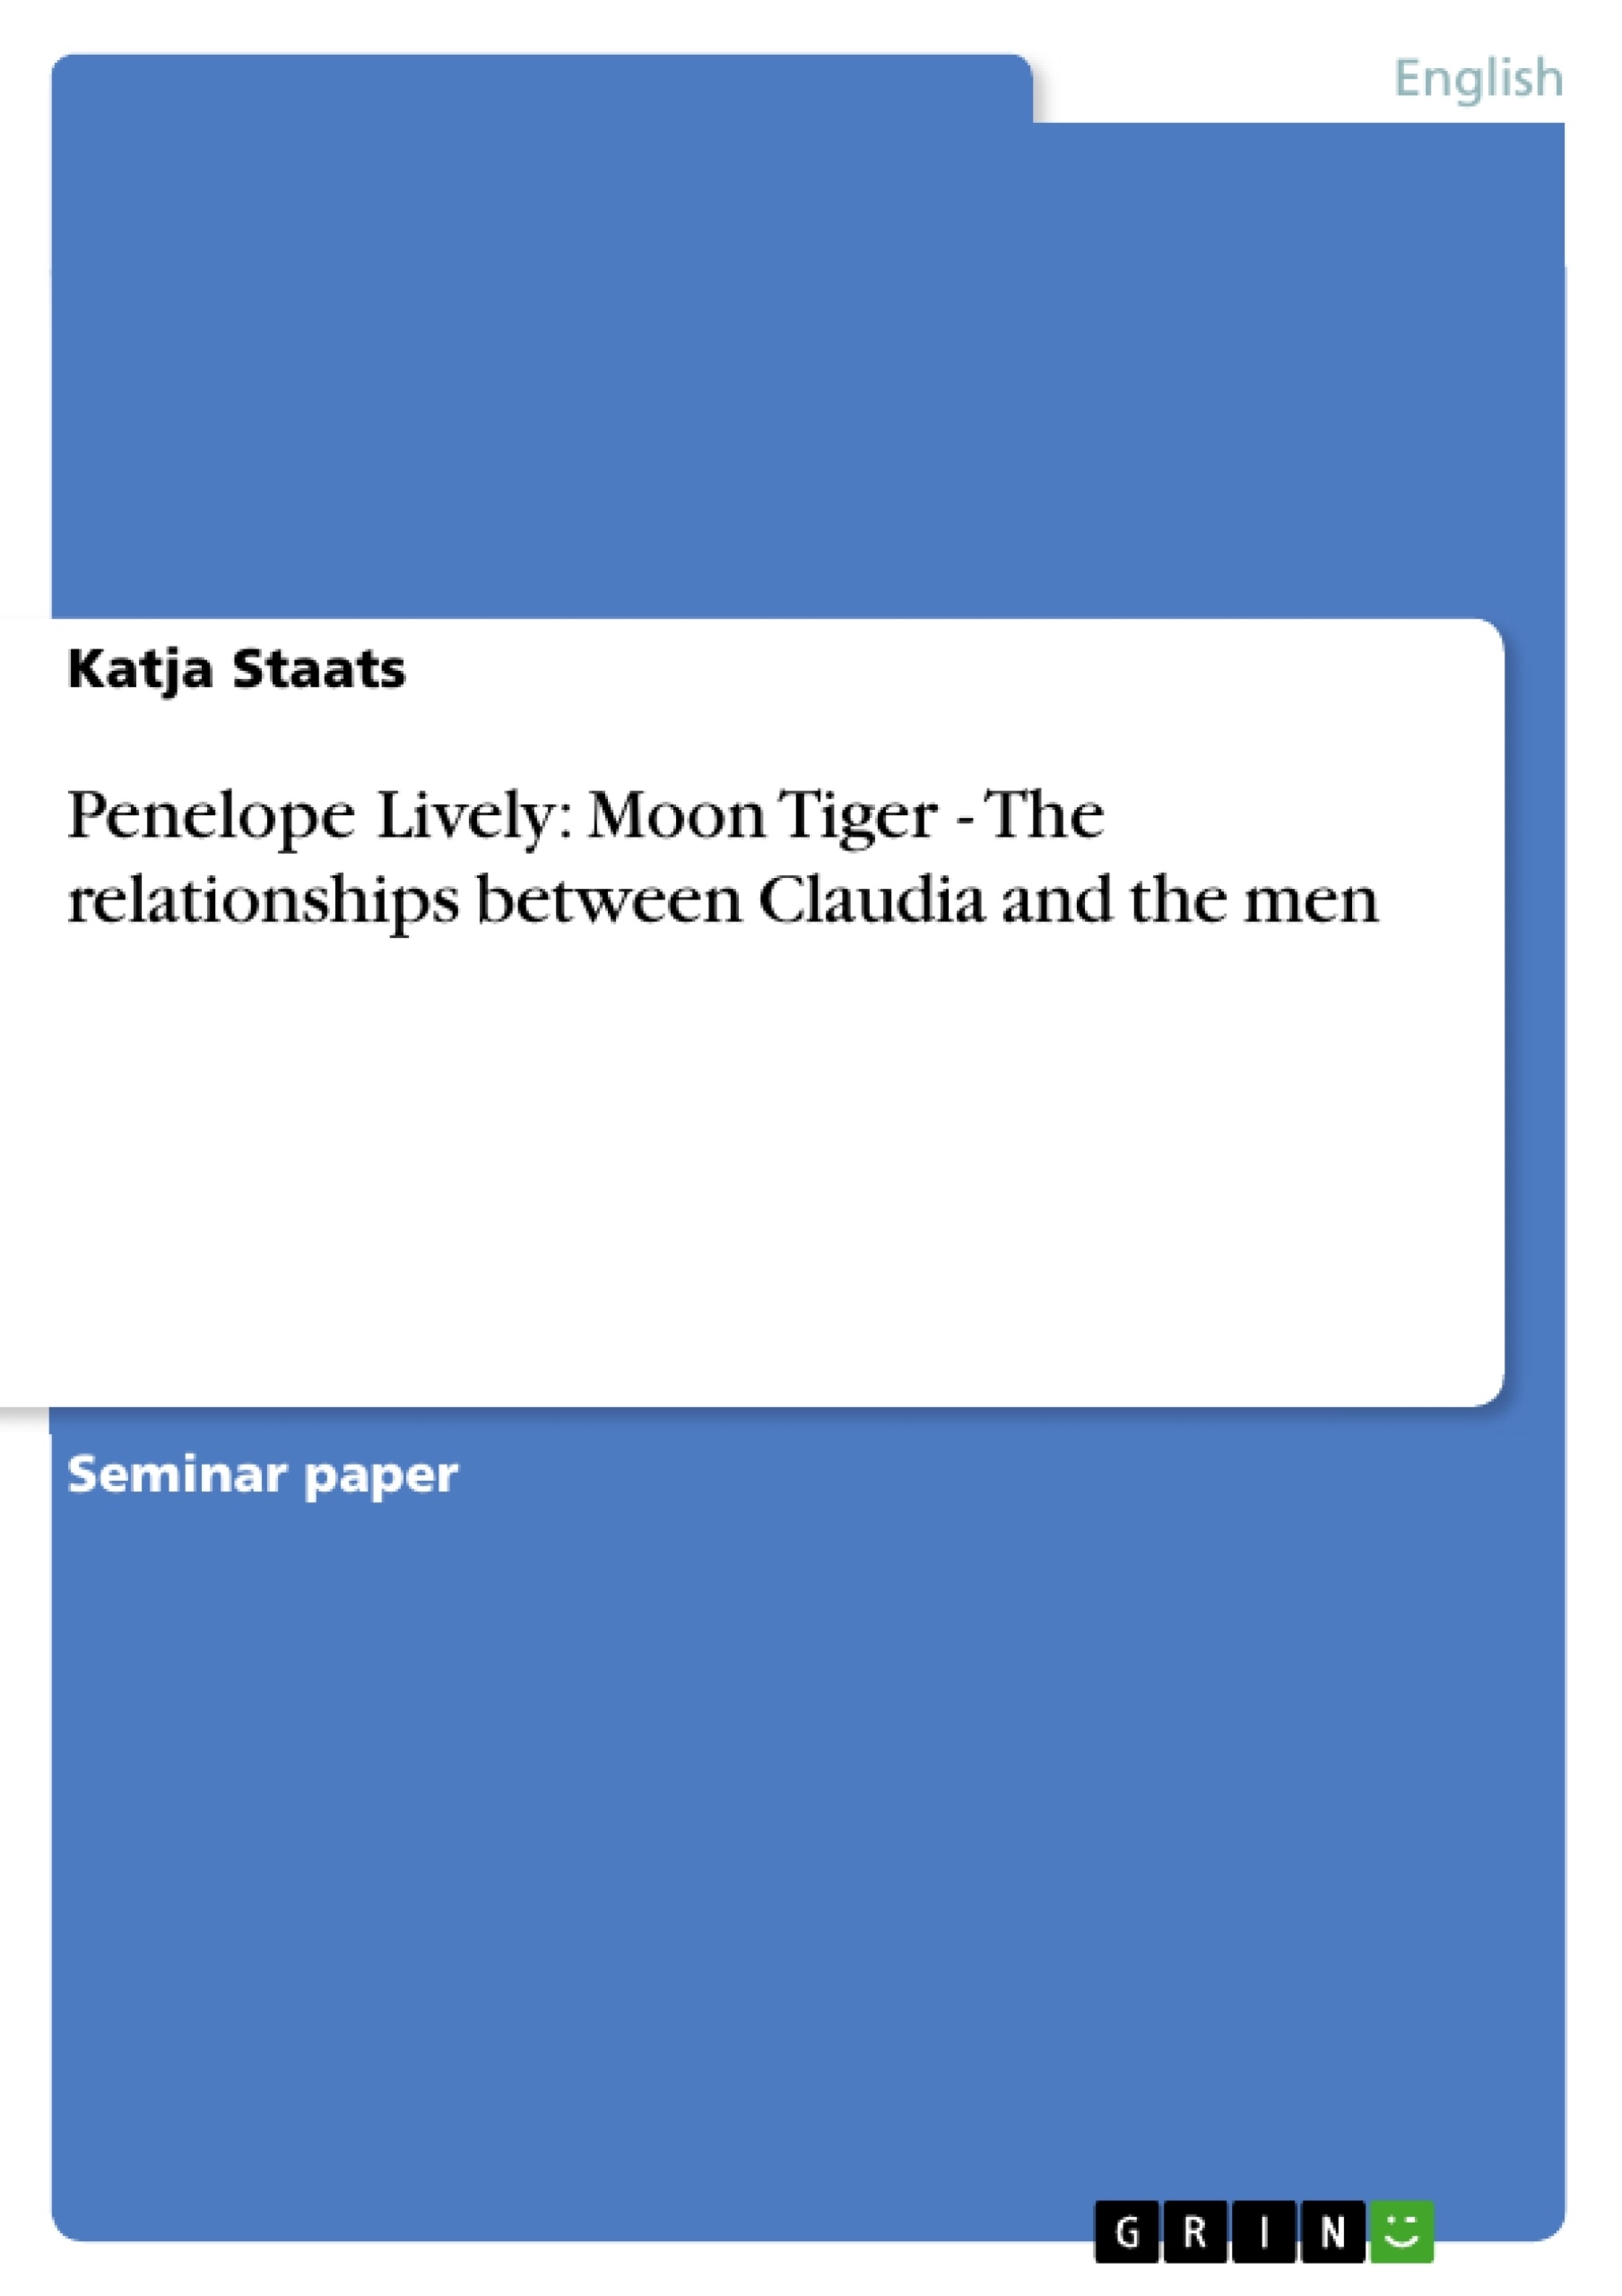 Title: Penelope Lively: Moon Tiger - The relationships between Claudia and the men